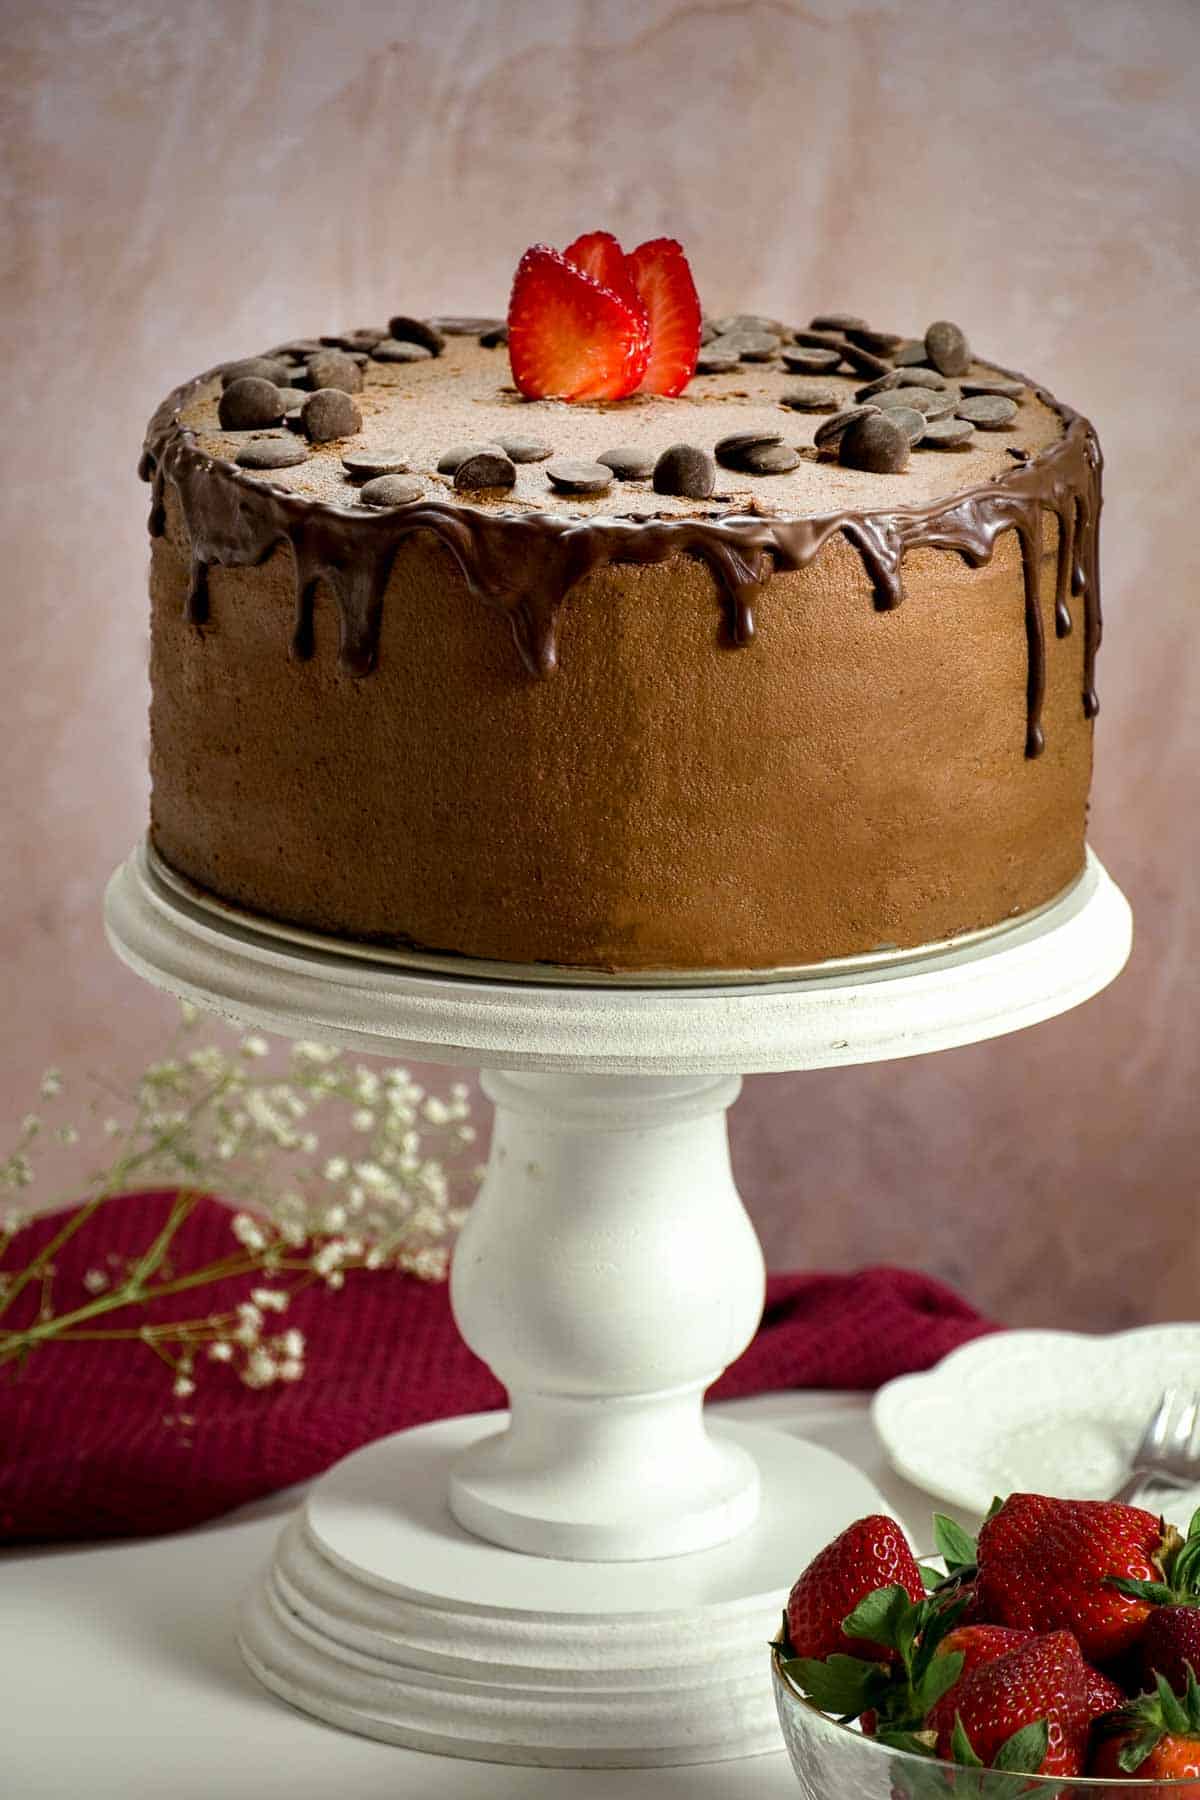 A chocolate cake with ganache drizzling down the side on a tall white cake stand.